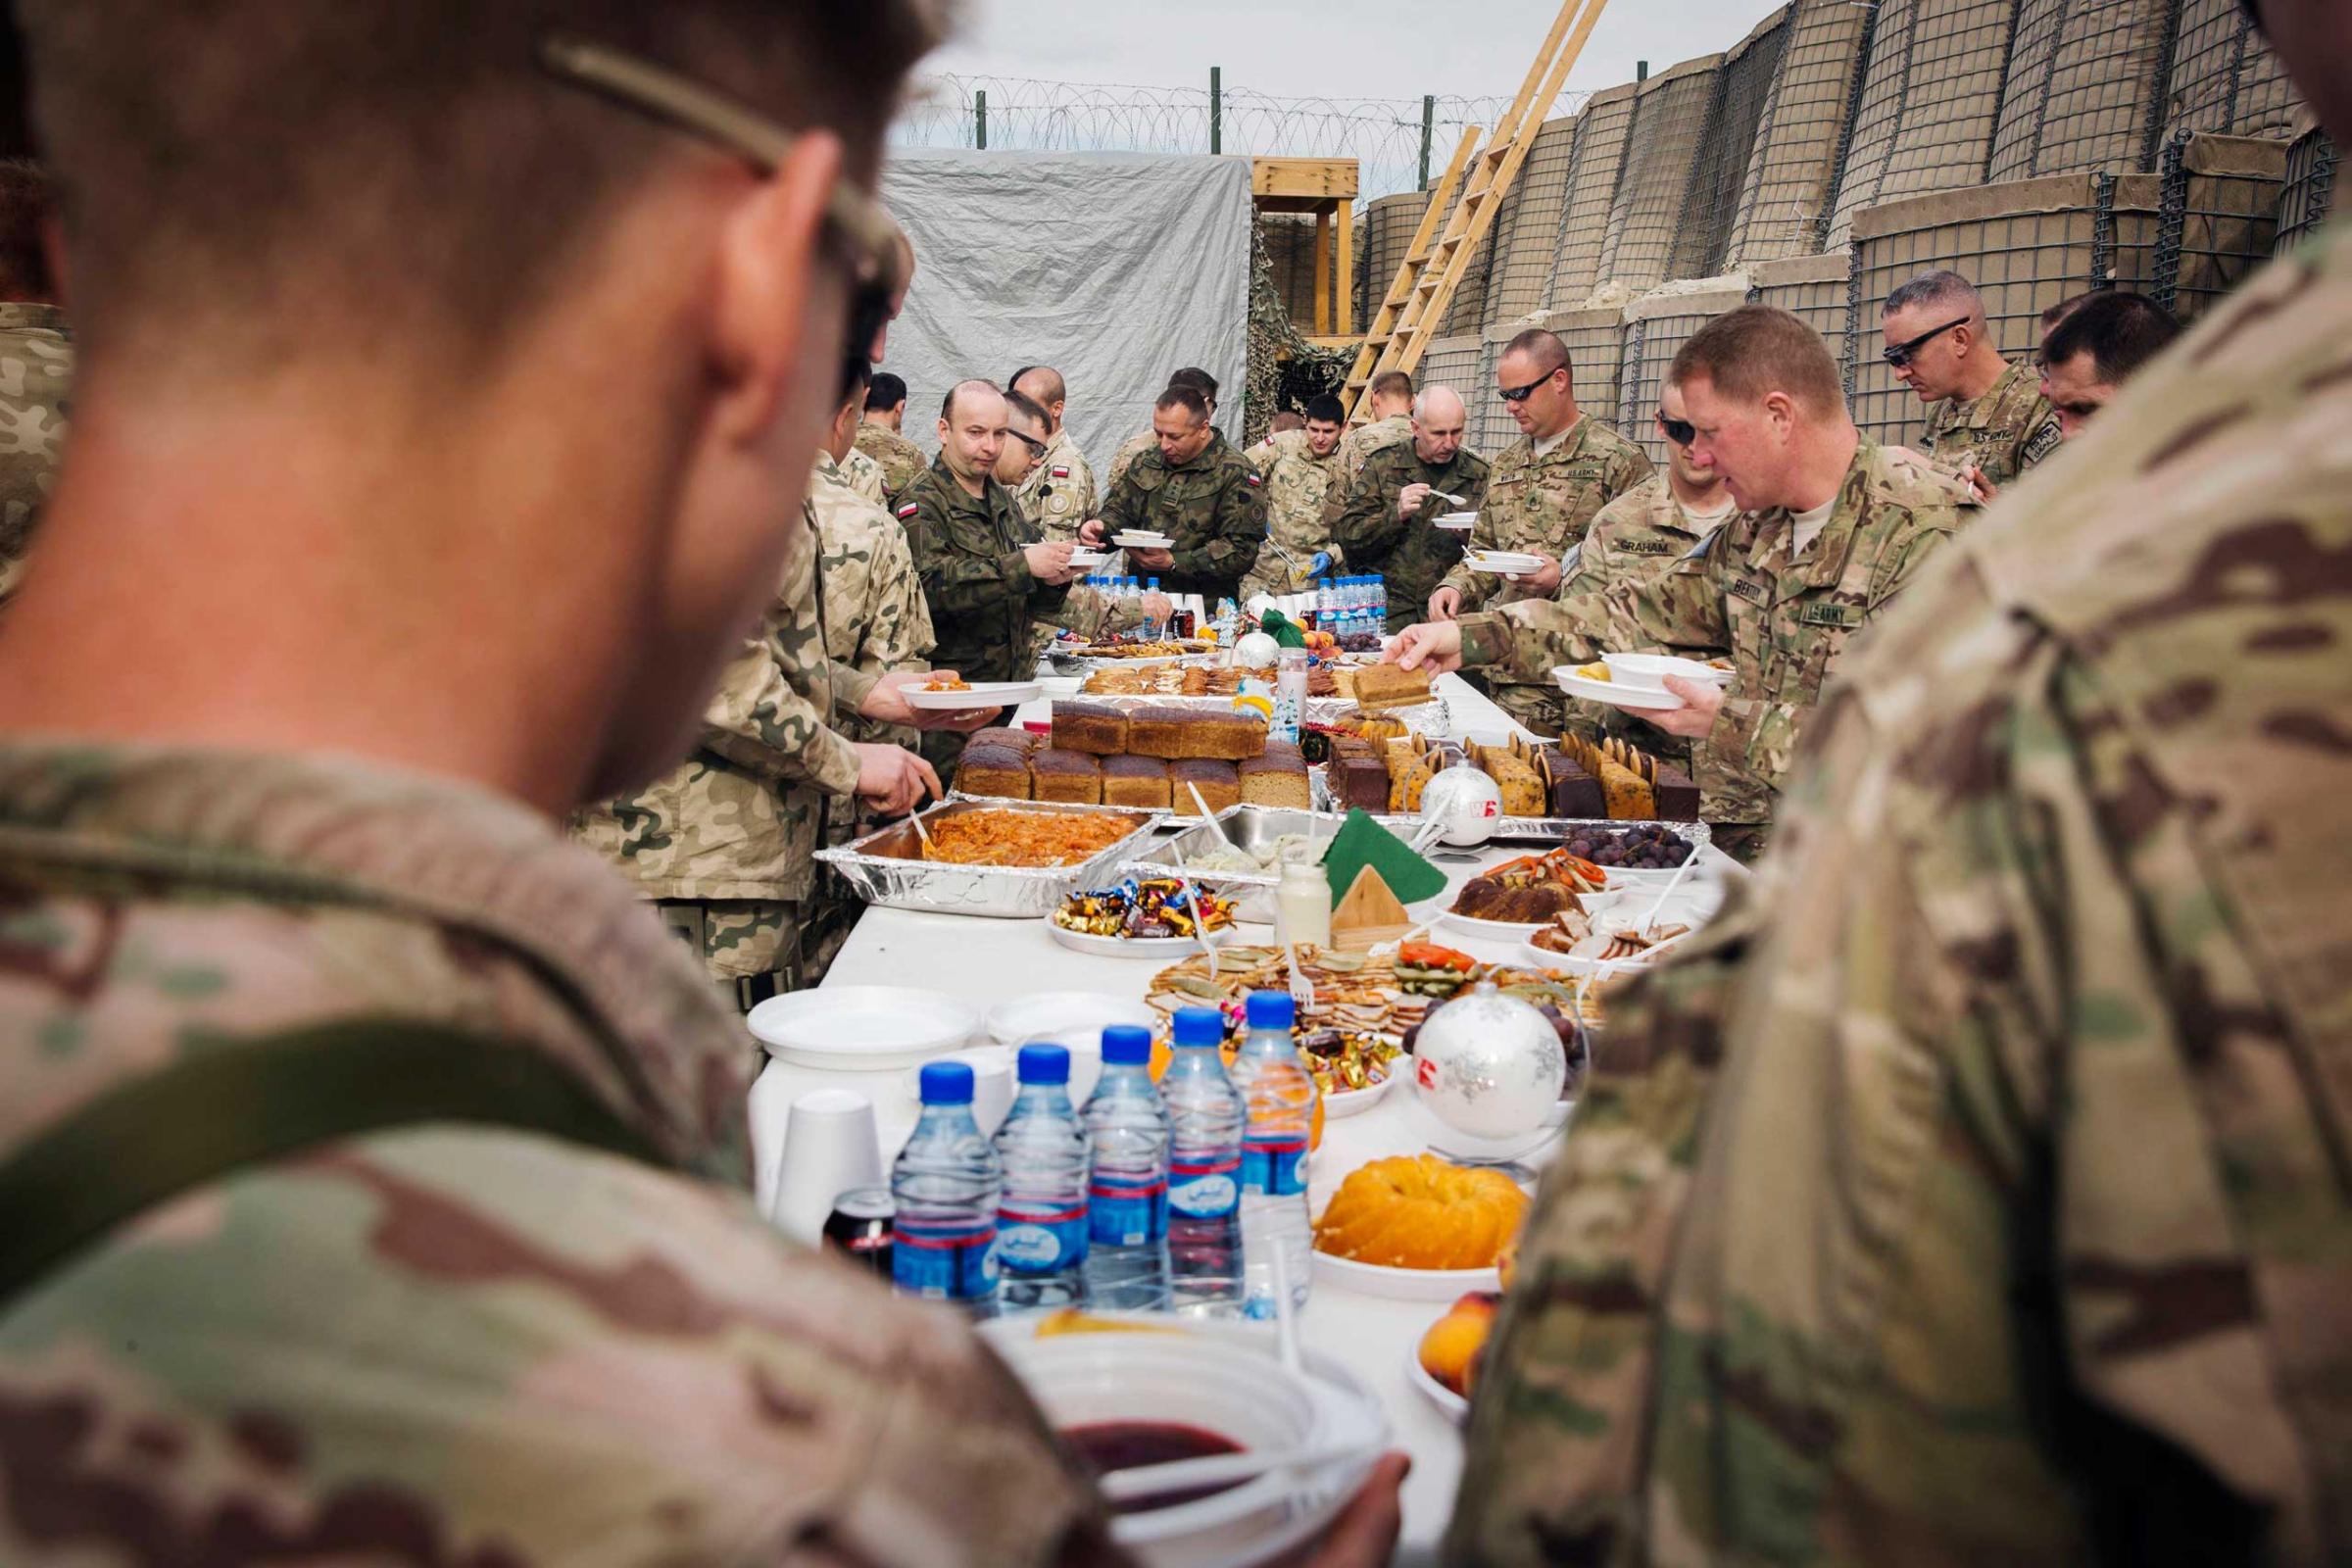 U.S. soldiers from the 3rd Cavalry Regiment take part in a Christmas Eve celebration with soldiers from the Polish army's 21st Mountain Brigade on forward operating base Gamberi in the Laghman province of Afghanistan